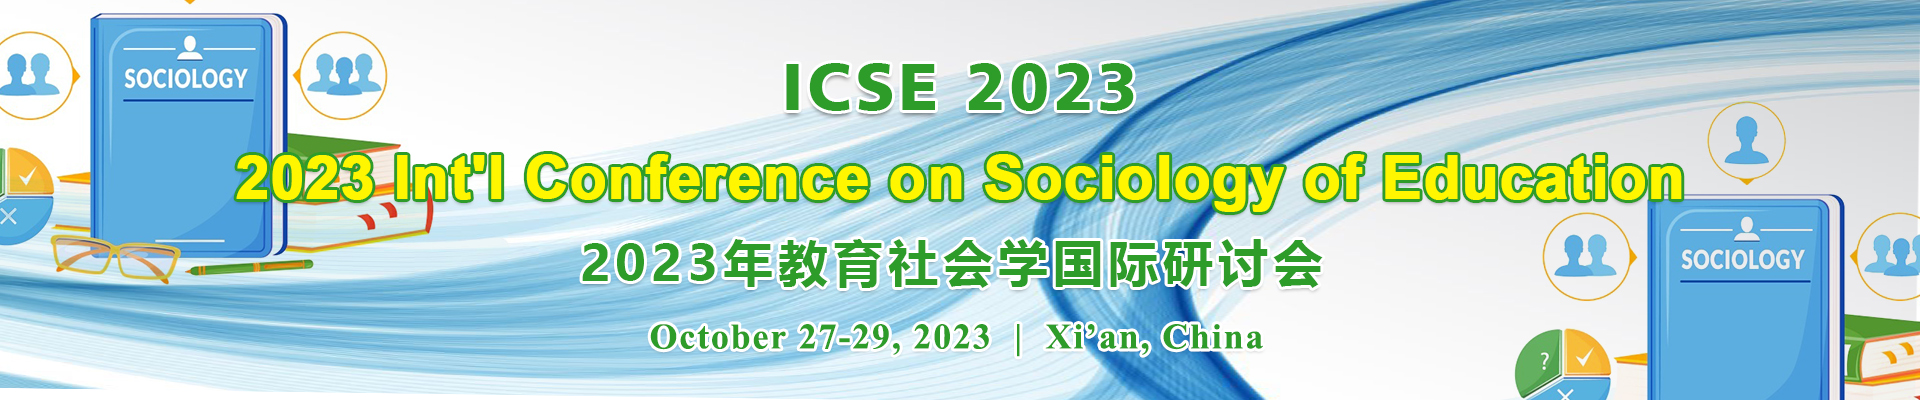 2023 Int'l Conference on Sociology of Education (ICSE 2023)